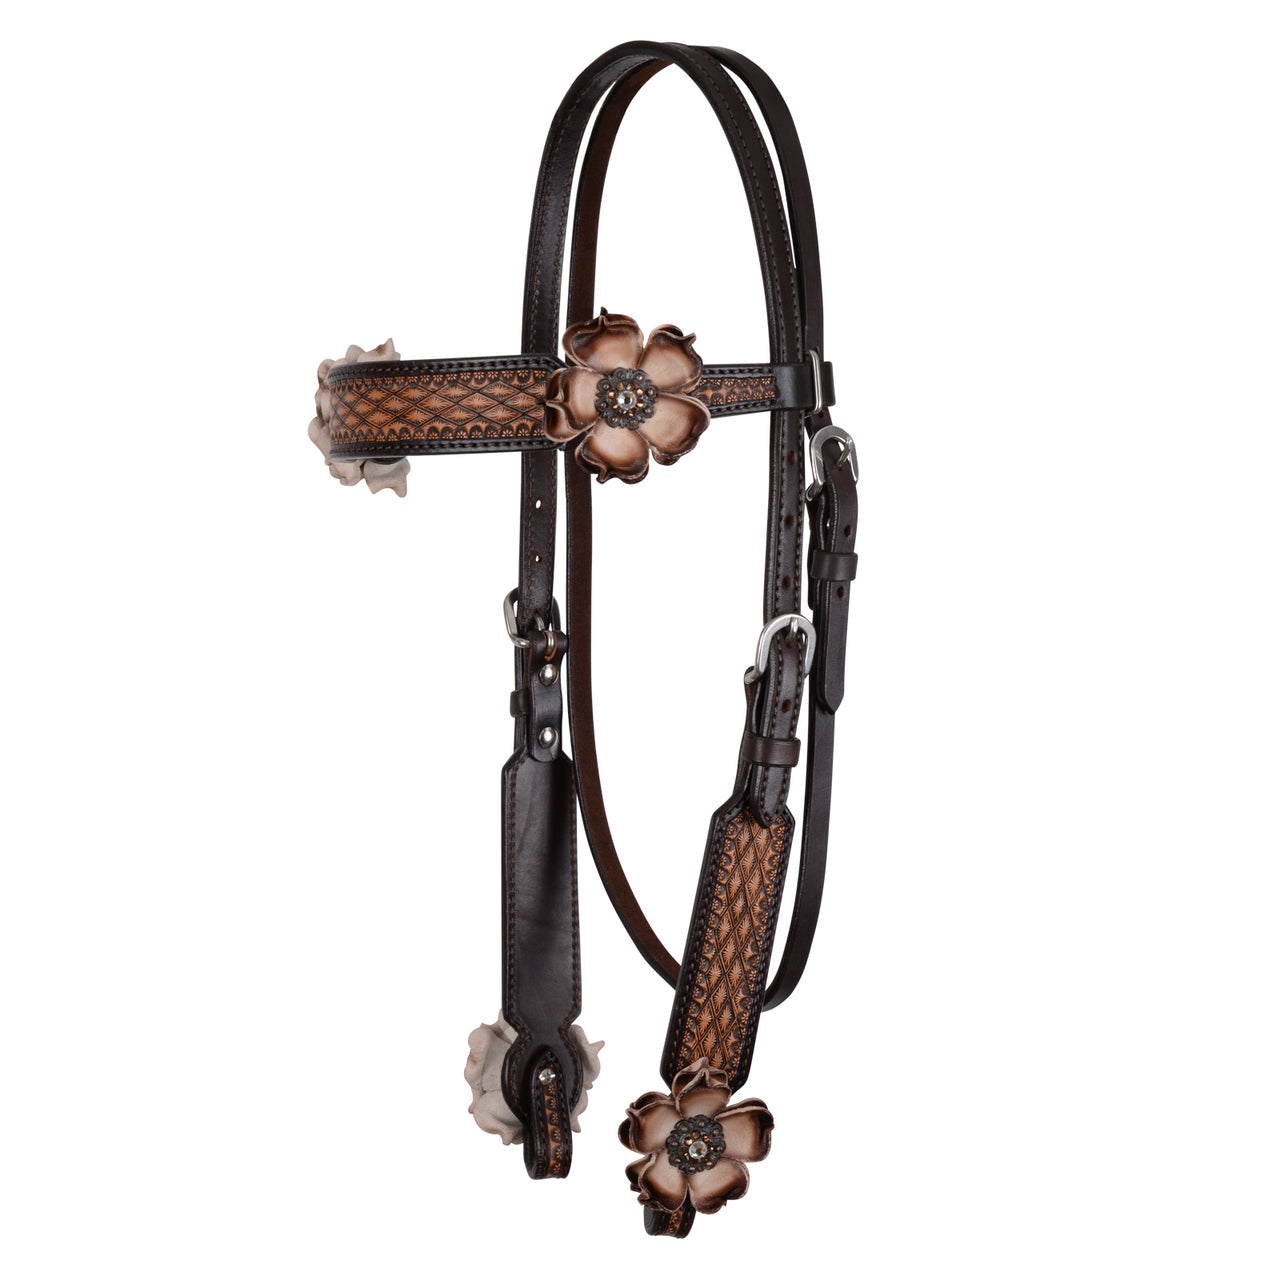 Circle Y Dusty Rose Browband Headstall